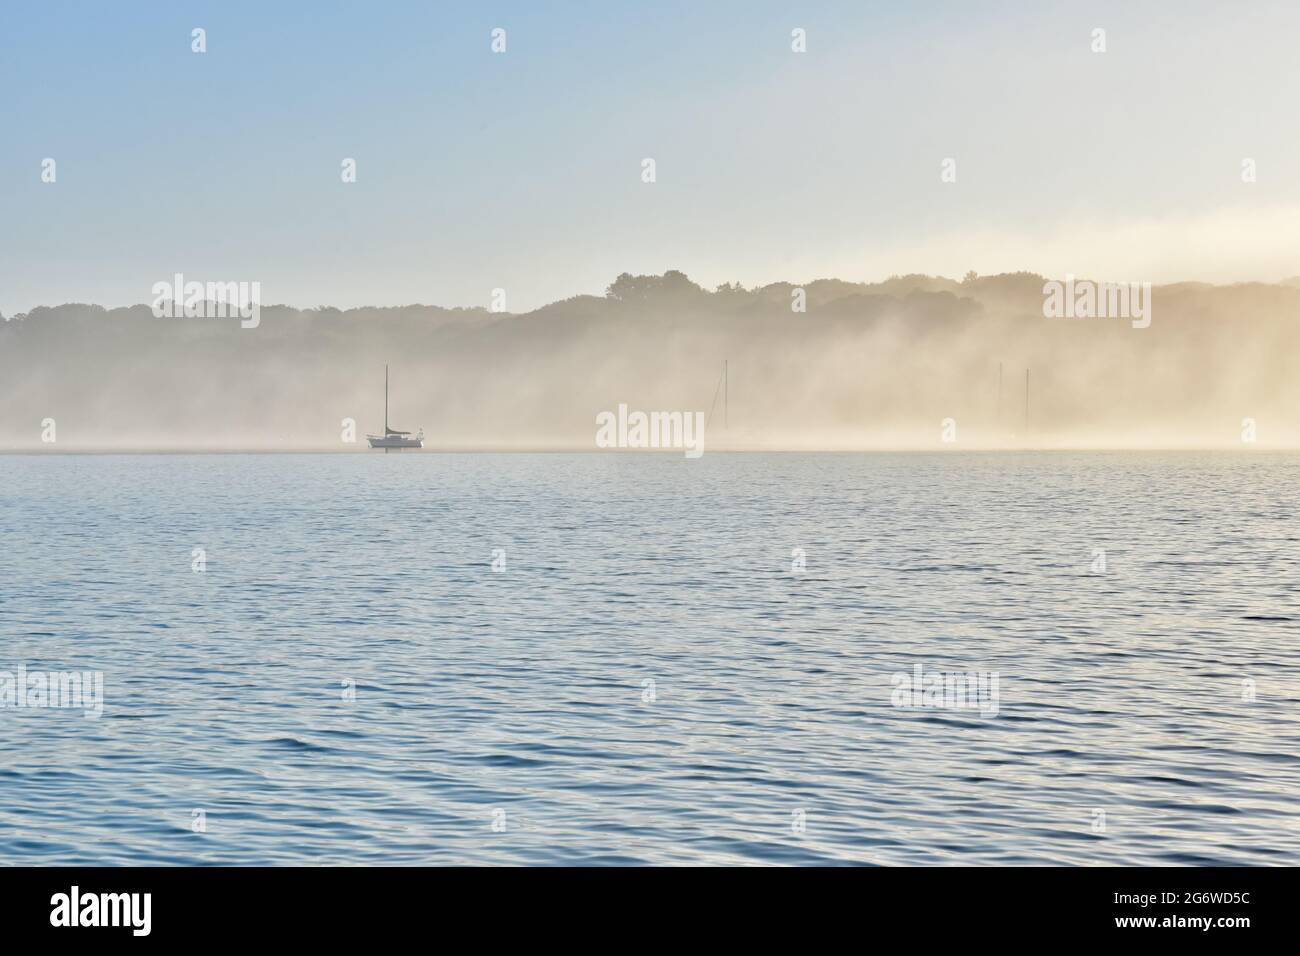 Sailboats in early morning fog in Port Jefferson Harbor, Long Island, NY. Copy space. Stock Photo